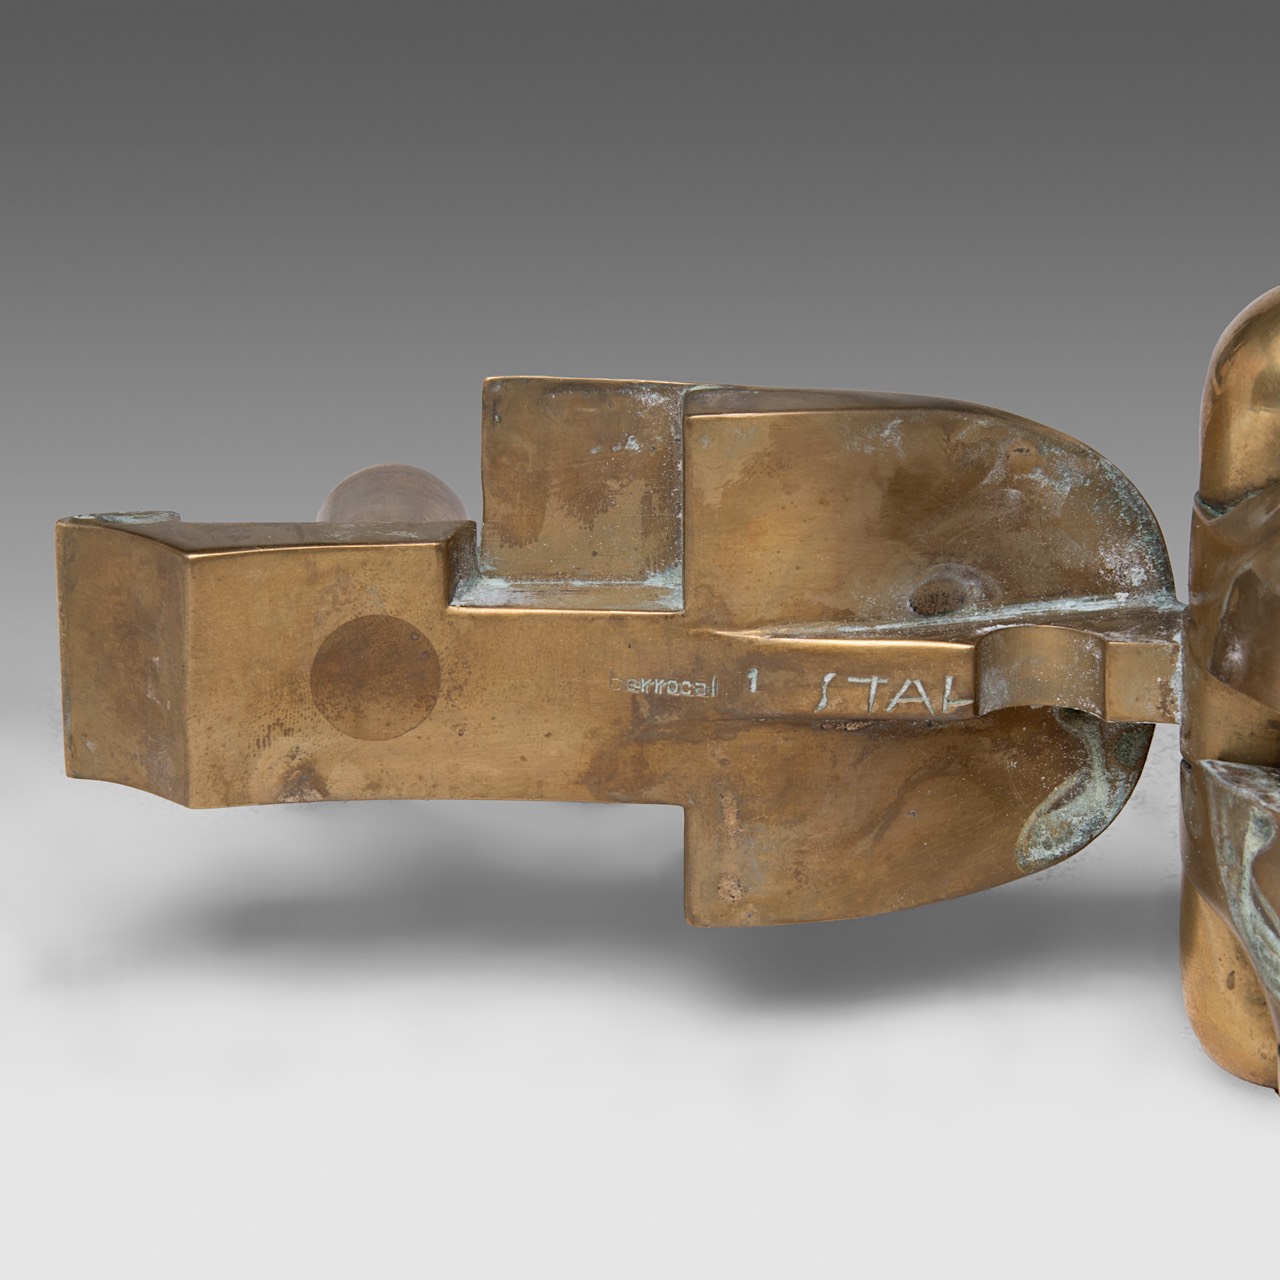 Miguel Berrocal (1933-2006), 'Romeo and Juliet', 1966, Ndeg1, polished brass, H 15 - W 20 cm - Image 11 of 12